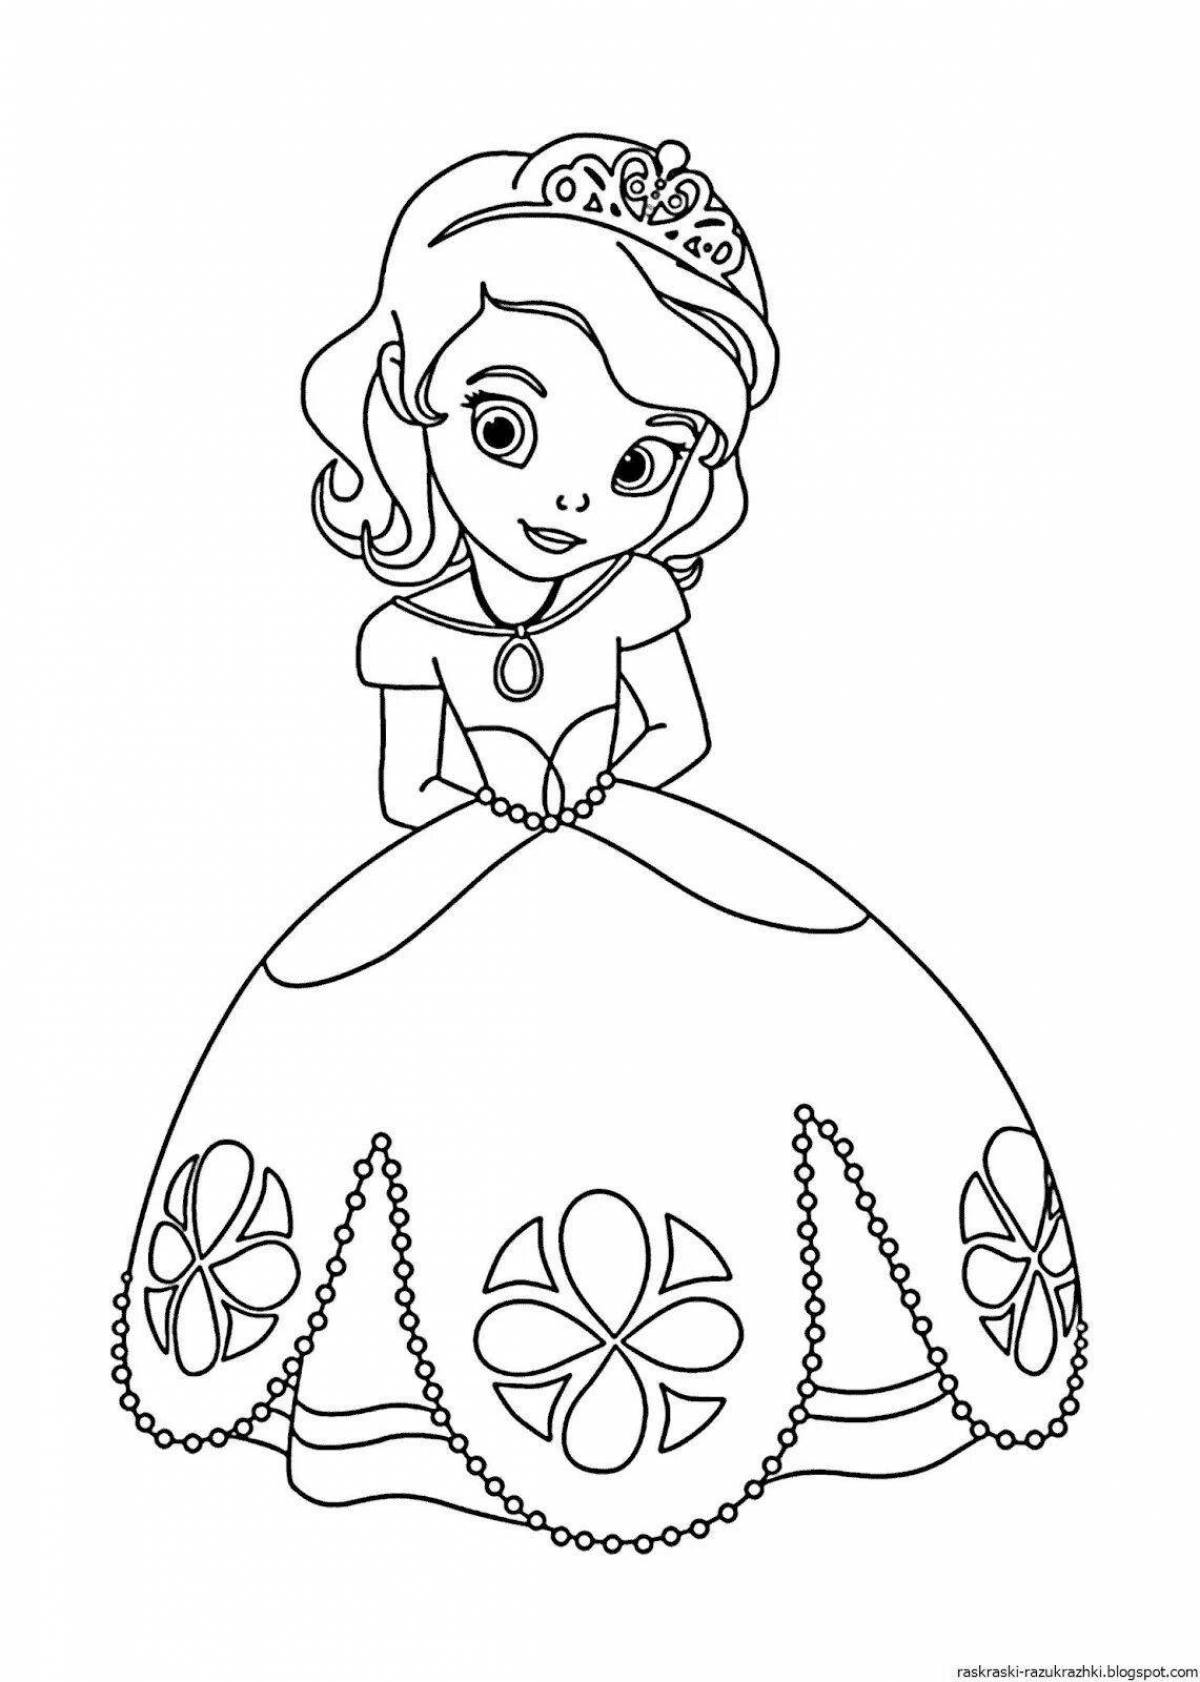 Amazing coloring book for 5 year old girls, princess